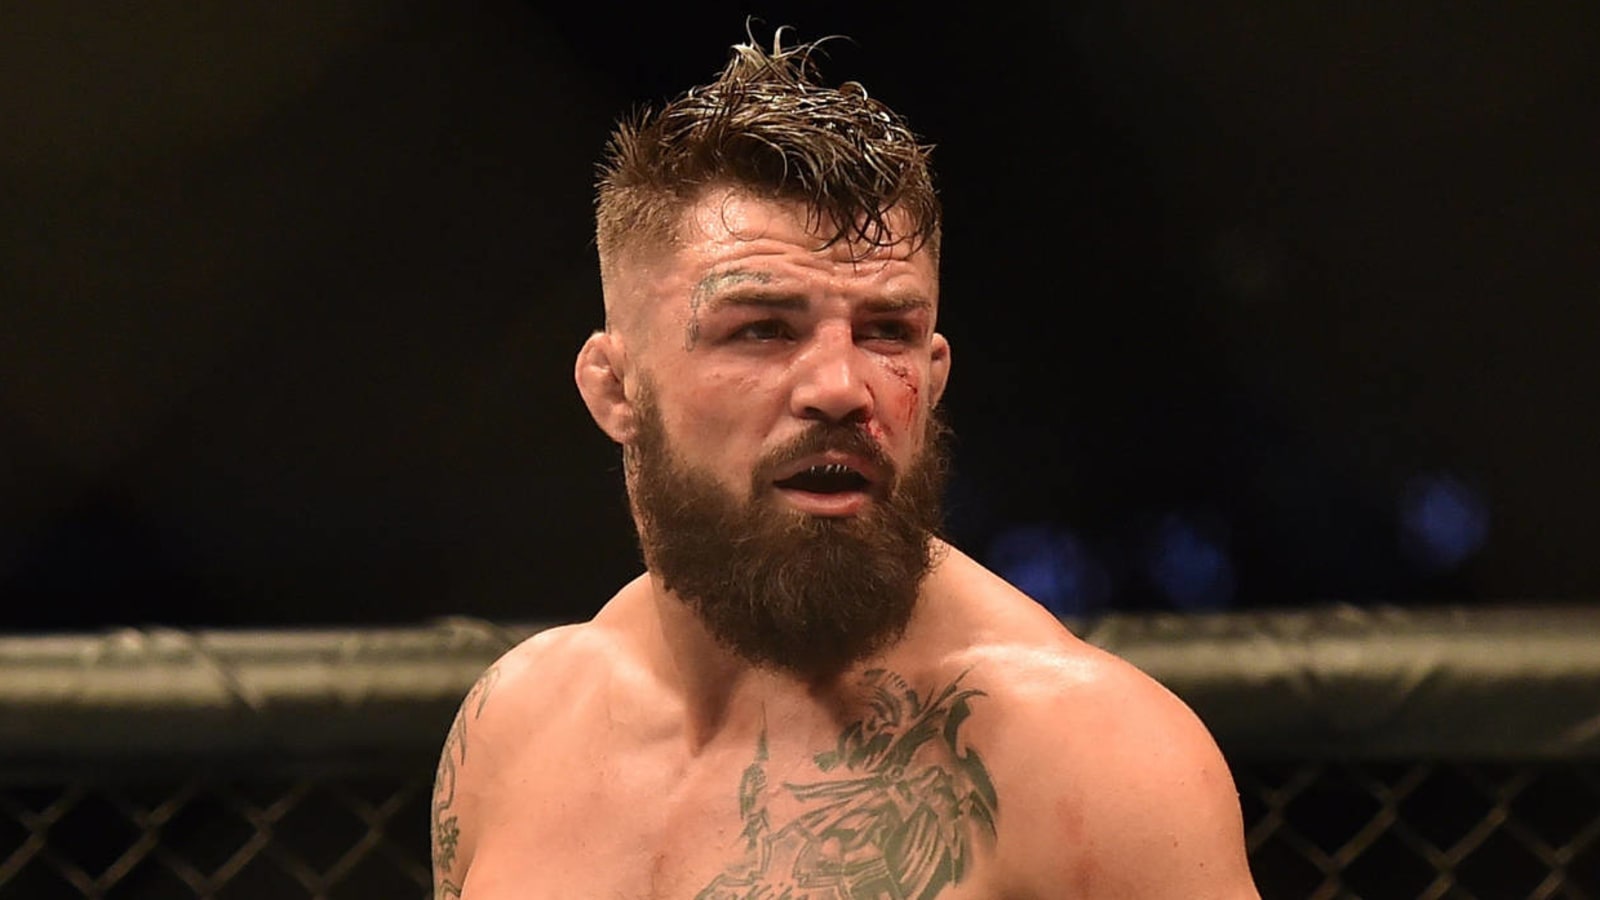 UFC's Mike Perry punches man in bar altercation, uses racial slurs